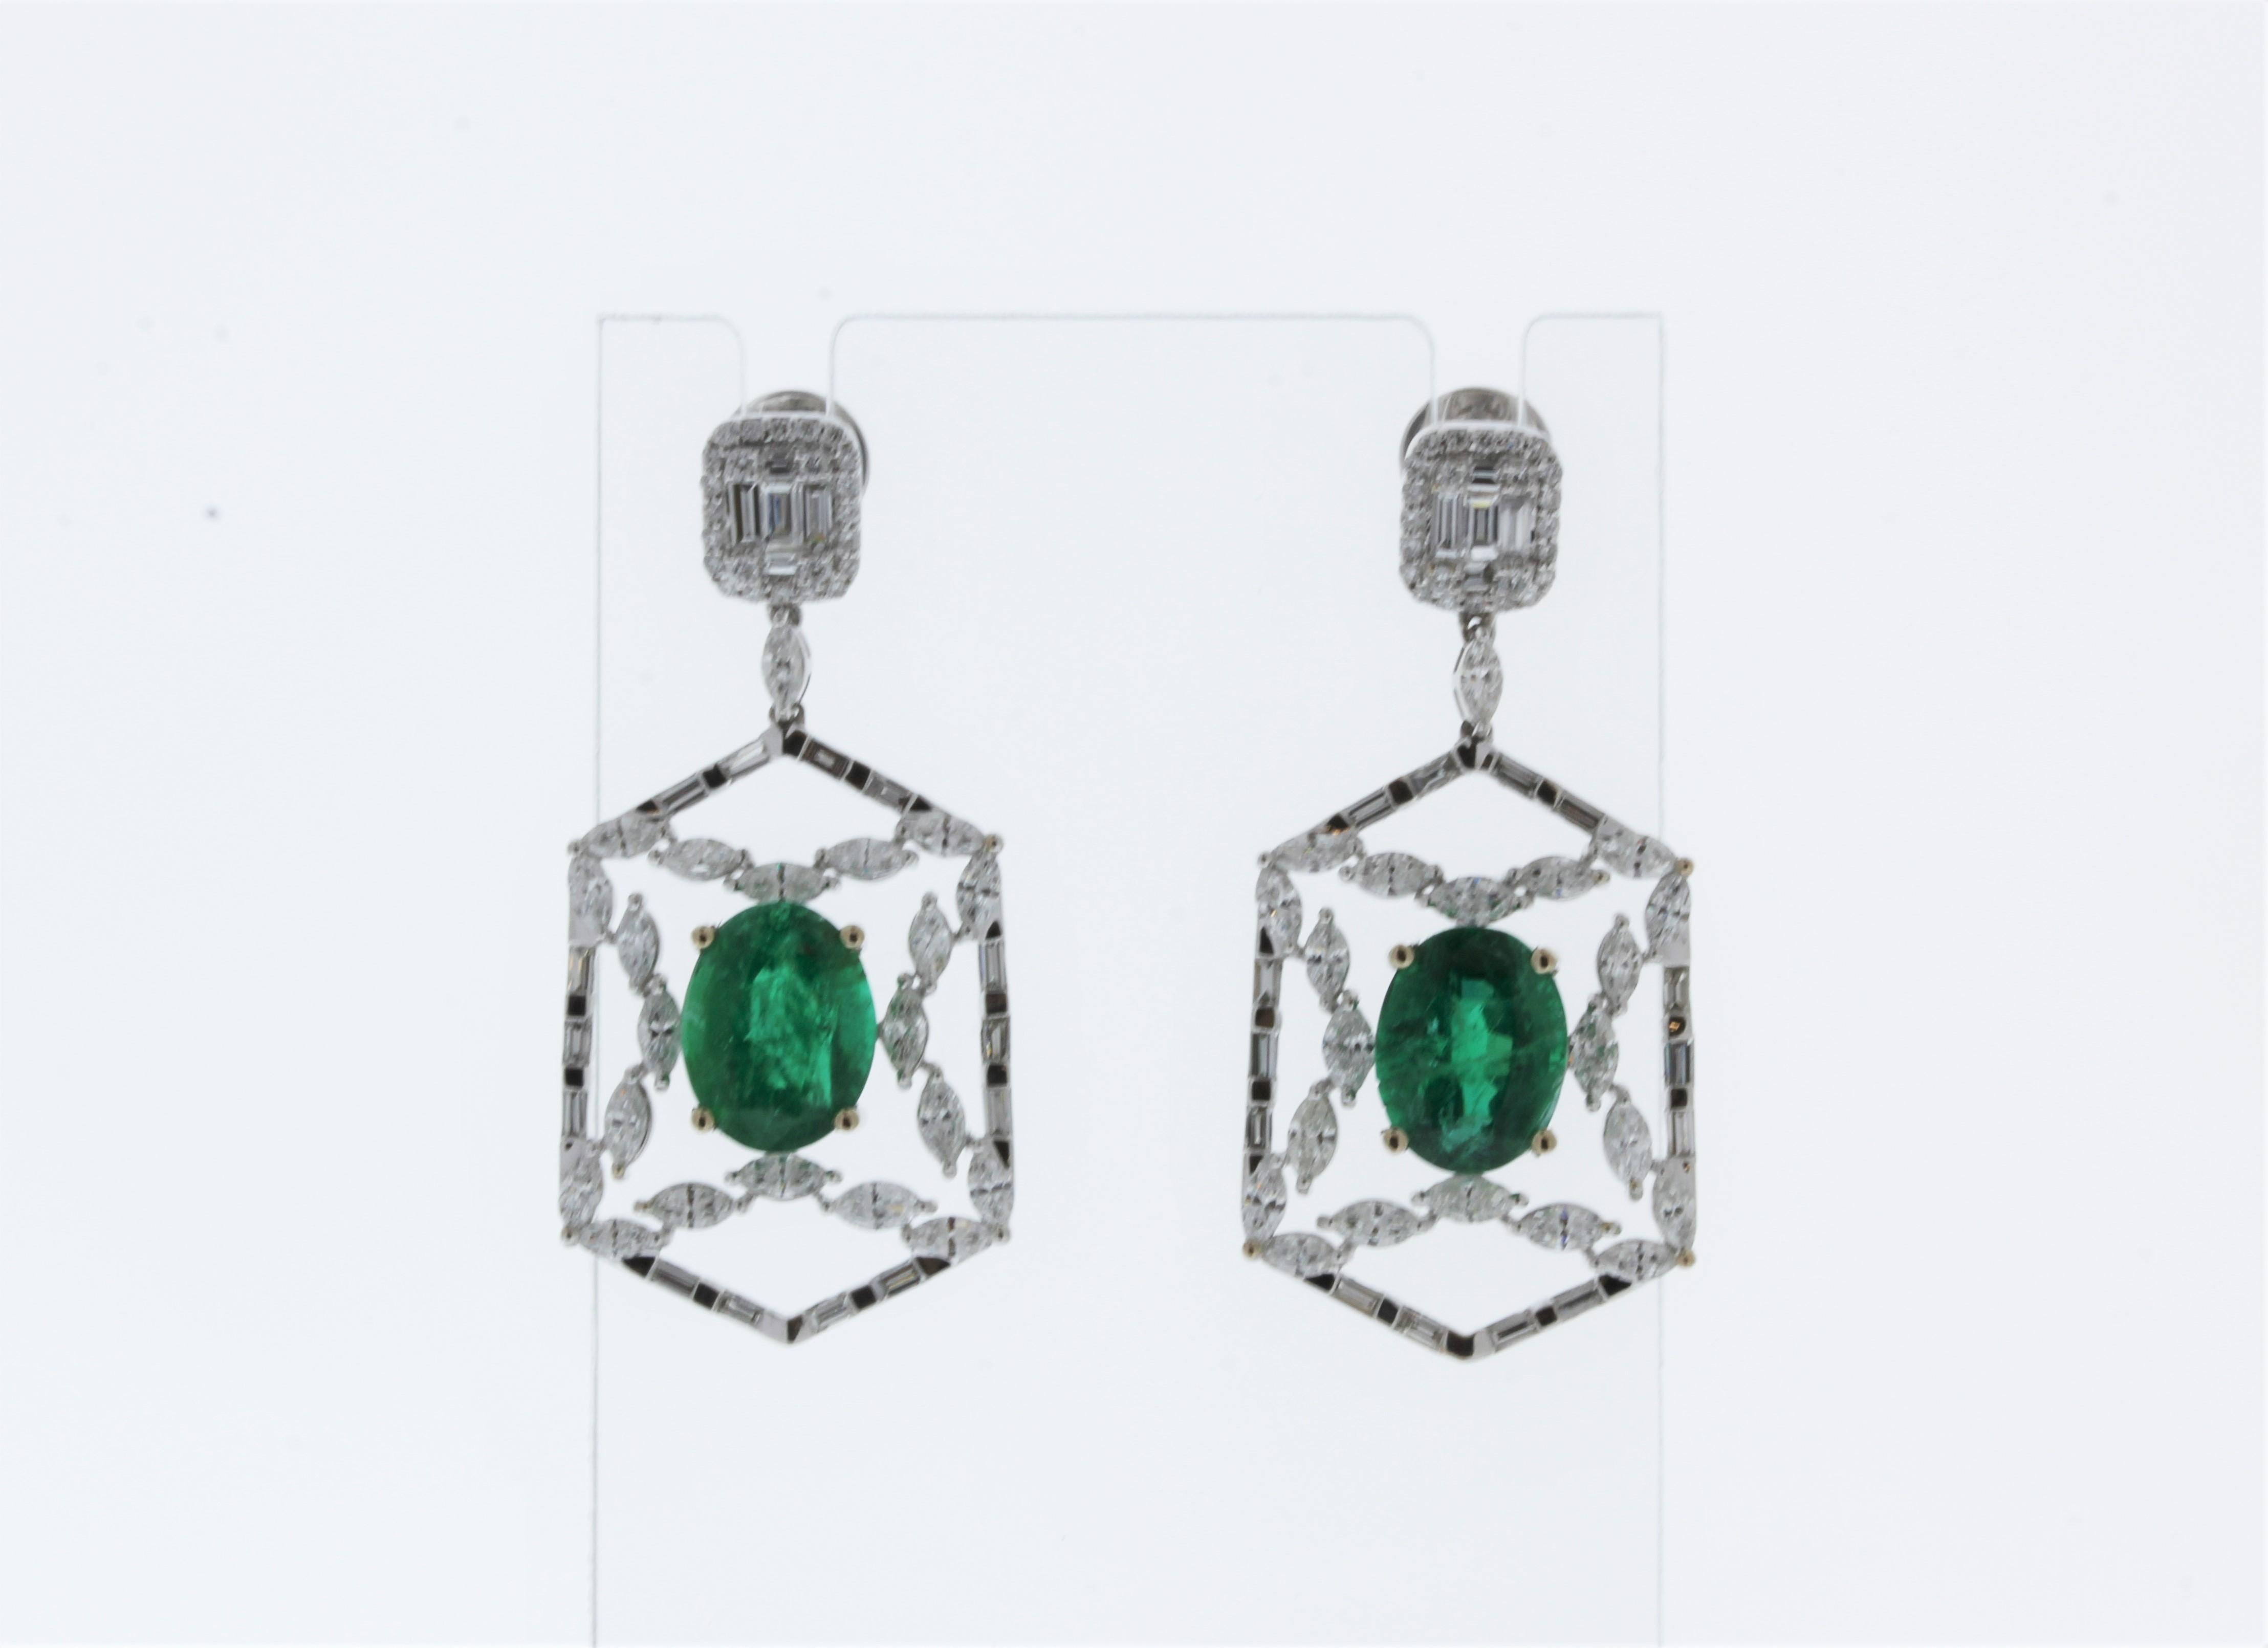 These are vintage-inspired emerald and diamond earrings. Two stunning oval shaped green emeralds, weighing 6.33 carats total, delicately centered. The emeralds are sourced in Brazil. The clarity and transparency are top-end. The mixed cut diamonds